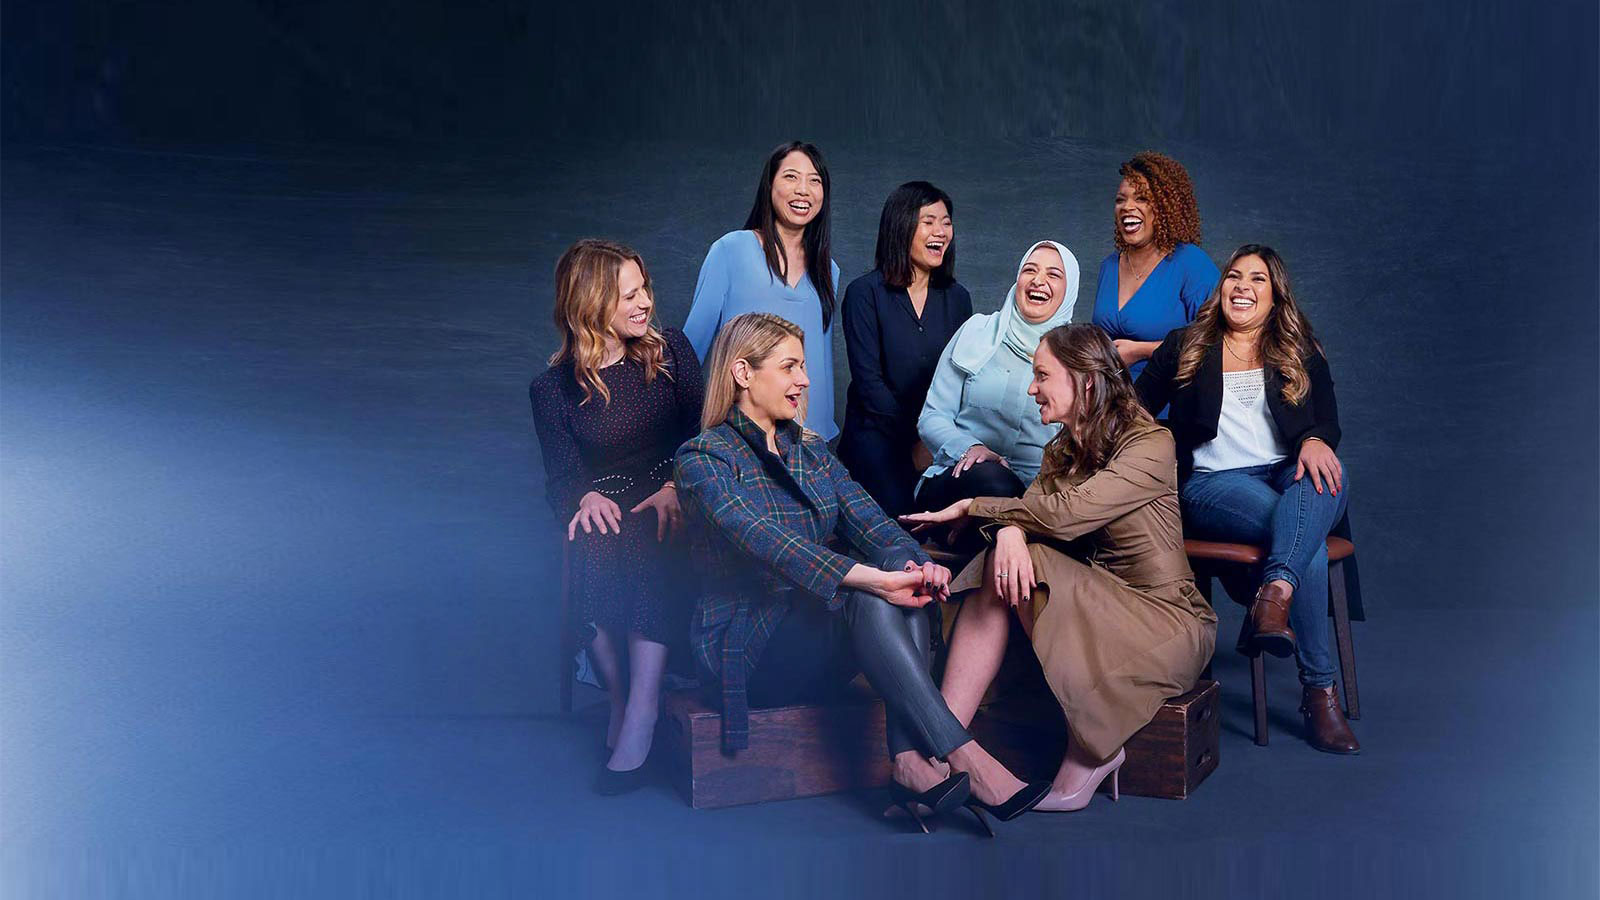 women entrepreneurs seated together laughing